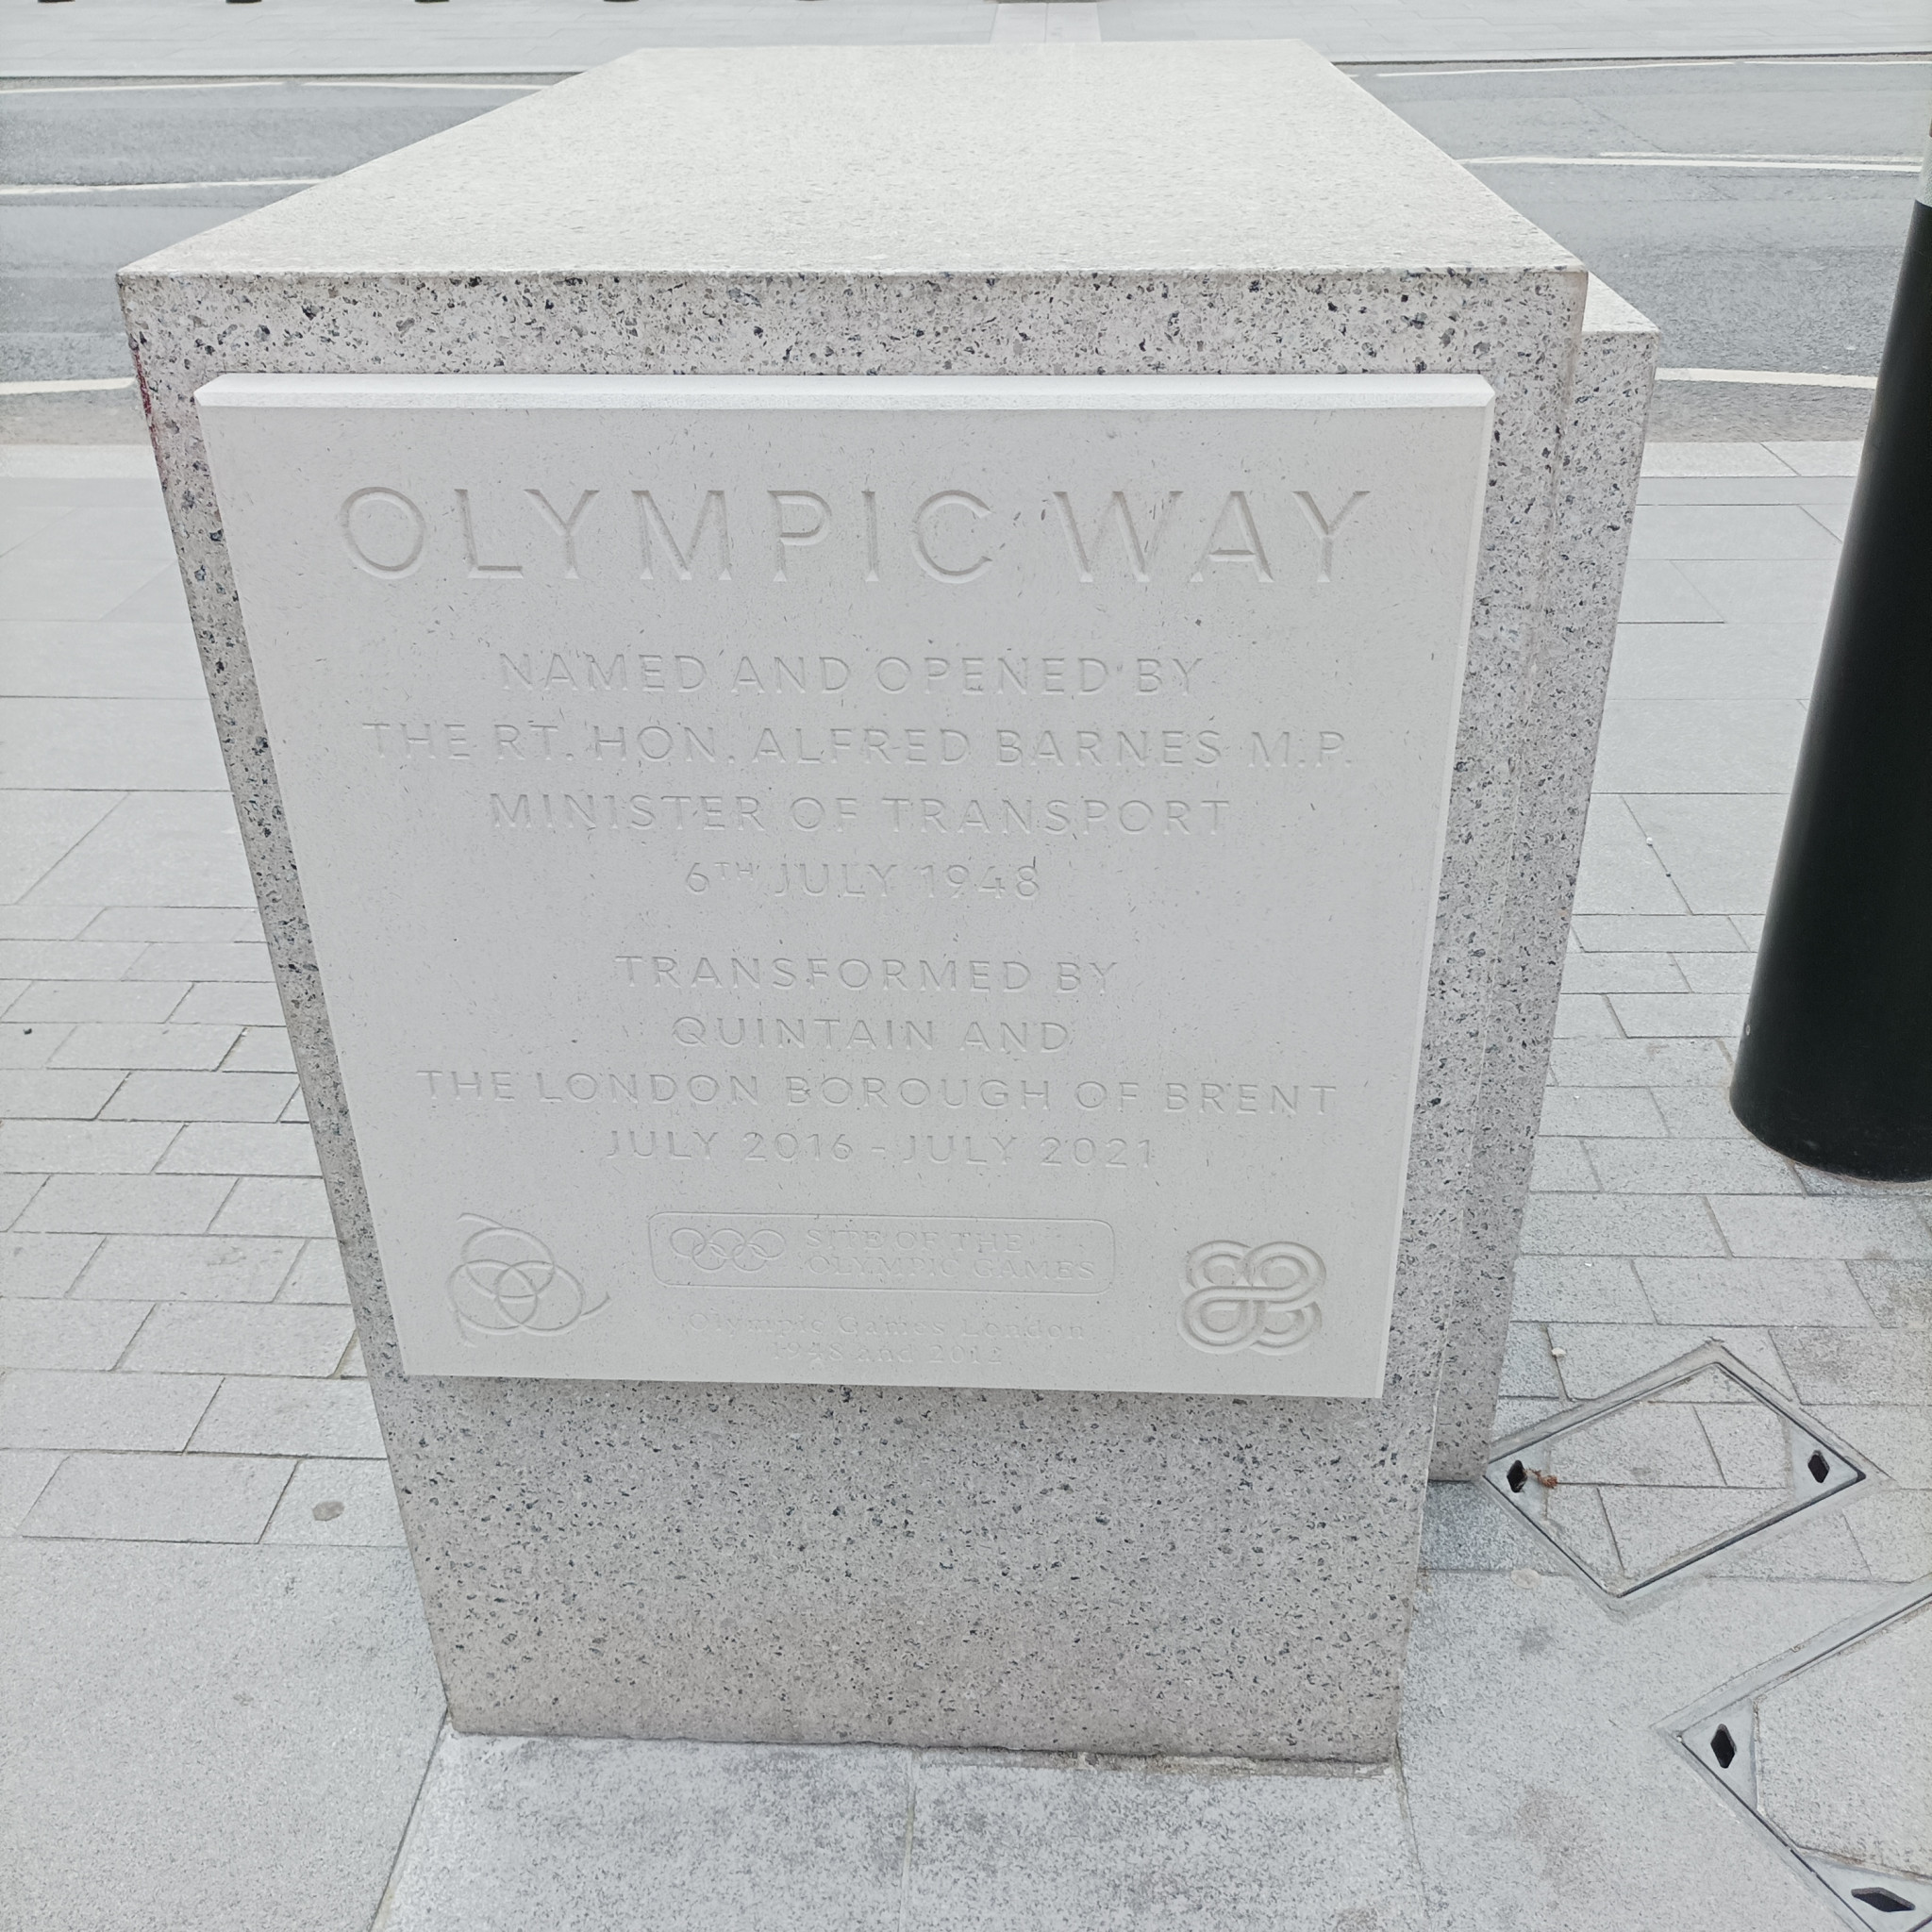 A similar plaque to the original was unveiled at the steps leading to Wembley Stadium ©ITG